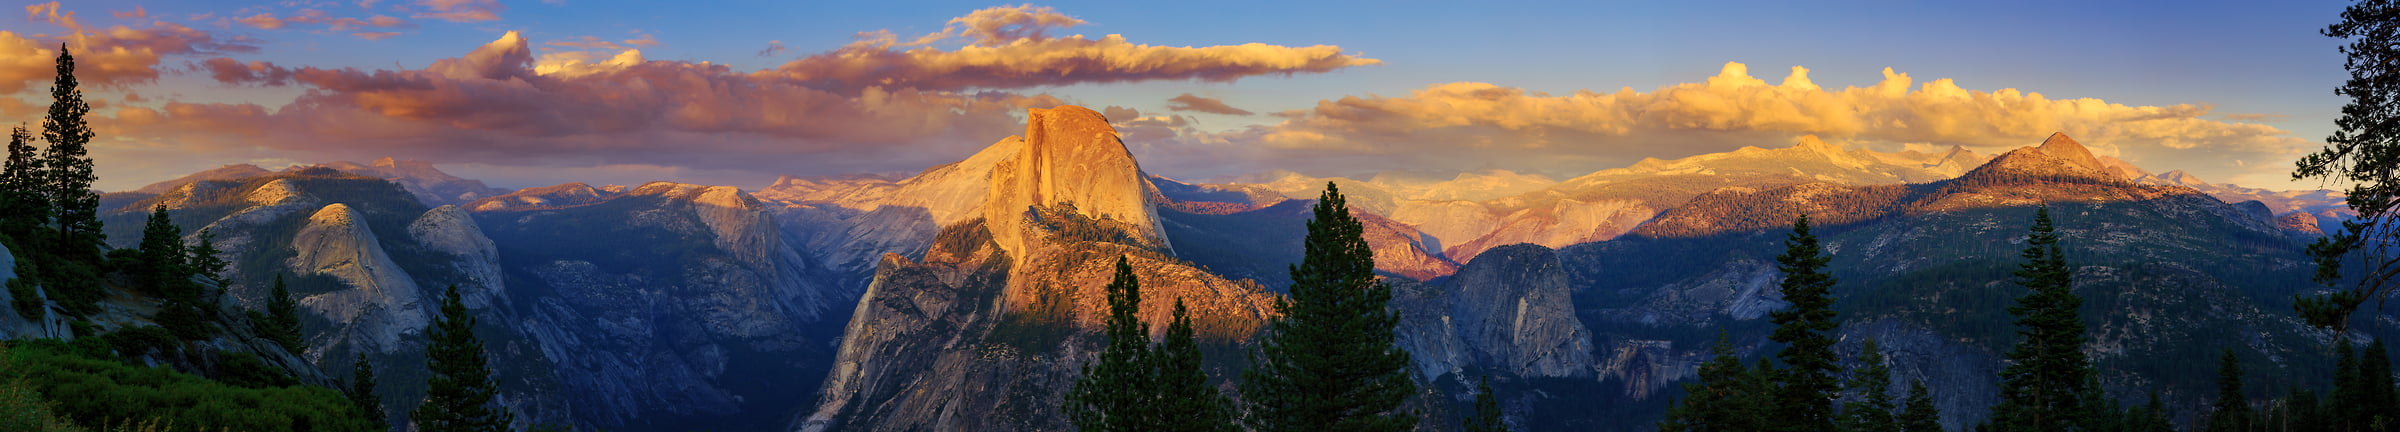 183 megapixels! A very high resolution, large-format VAST photo print of the Yosemite Naitonal Park valley and Half Dome at sunset from Glacier Point; nature landscape photo created by Guido Brandt.